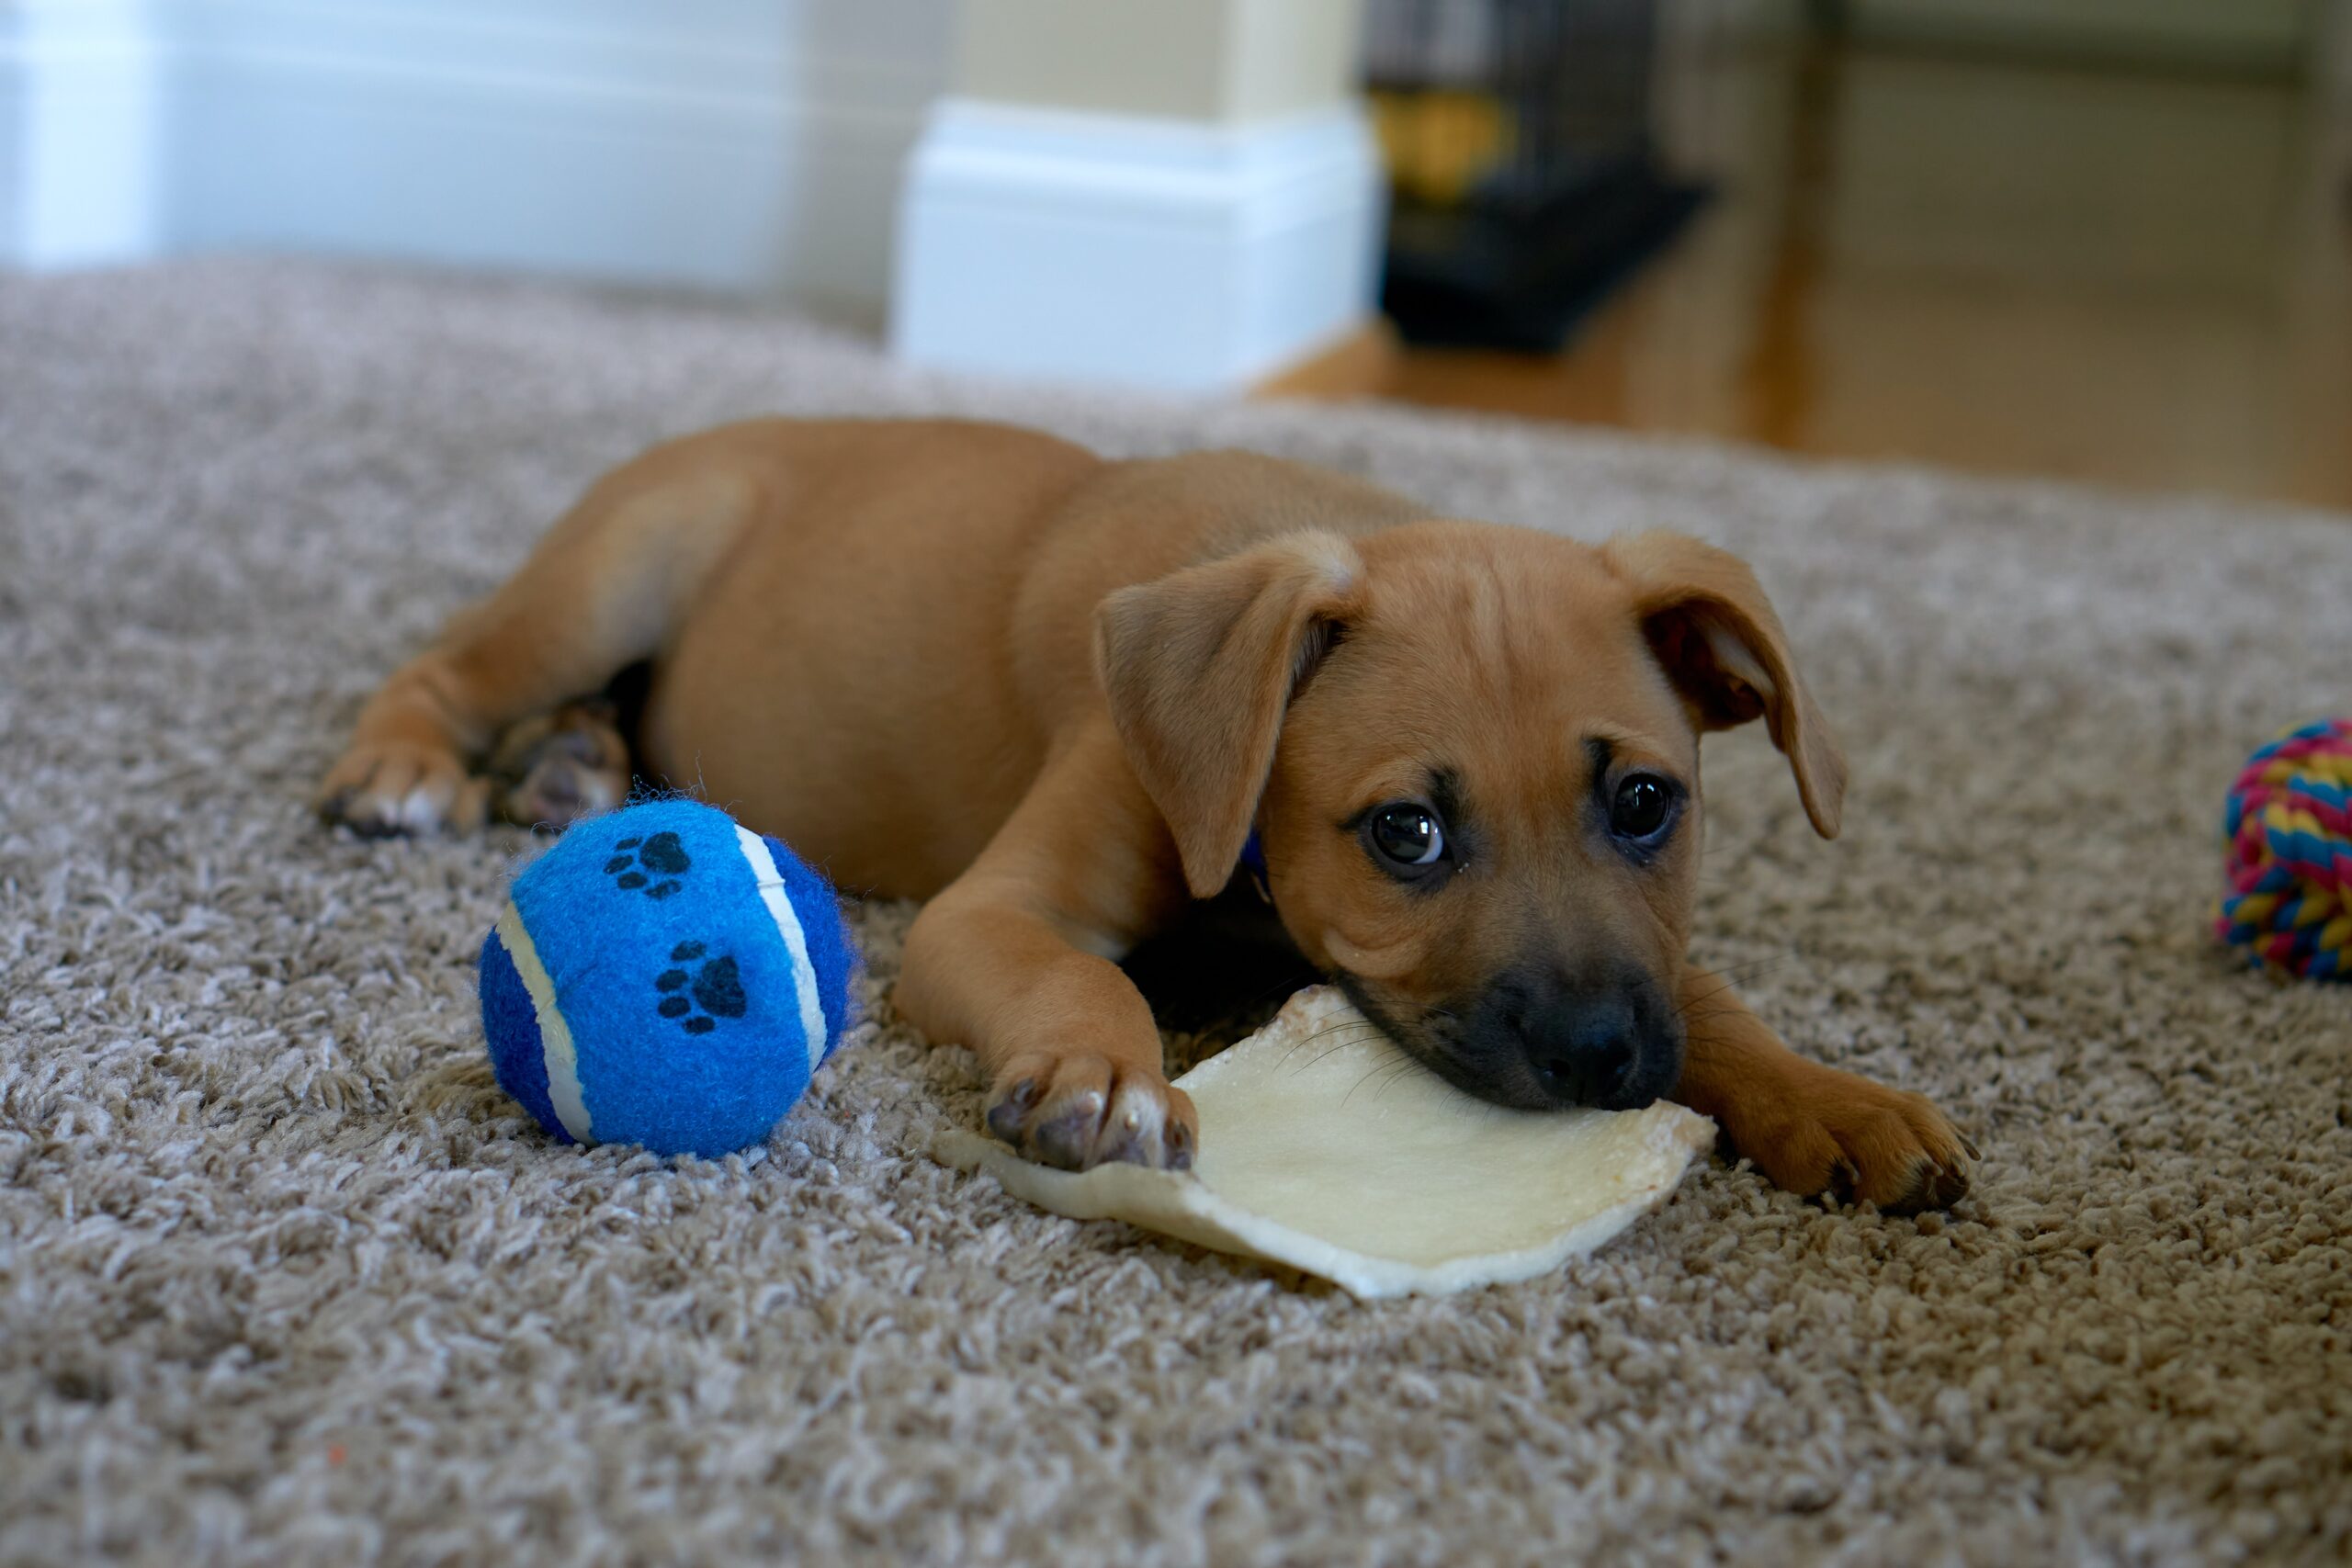 Puppy with a ball